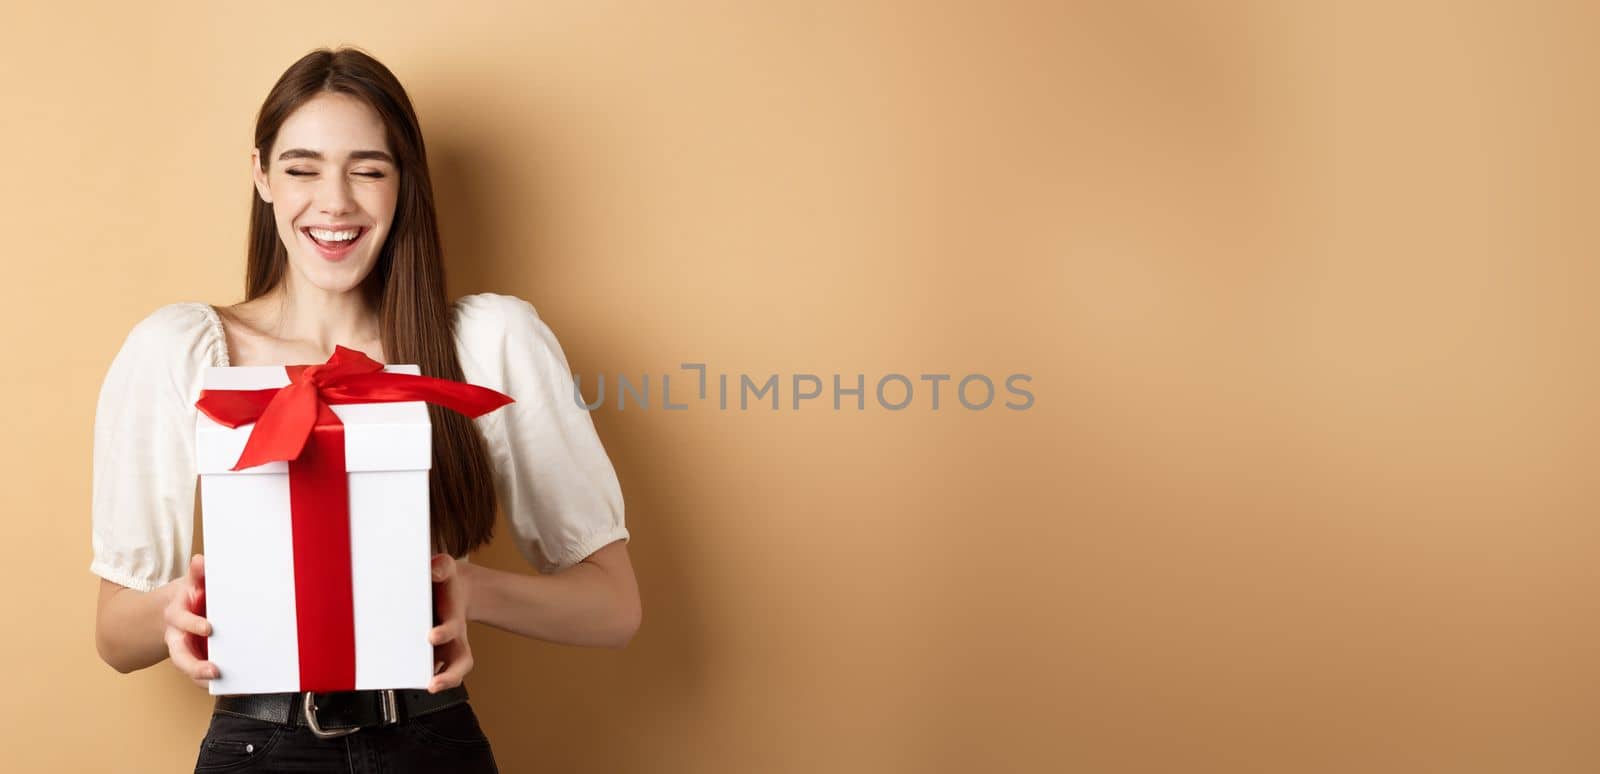 Happy smiling woman laughing, holding gift box from lover, enjoying romantic date on Valentines day, standing on beige background.